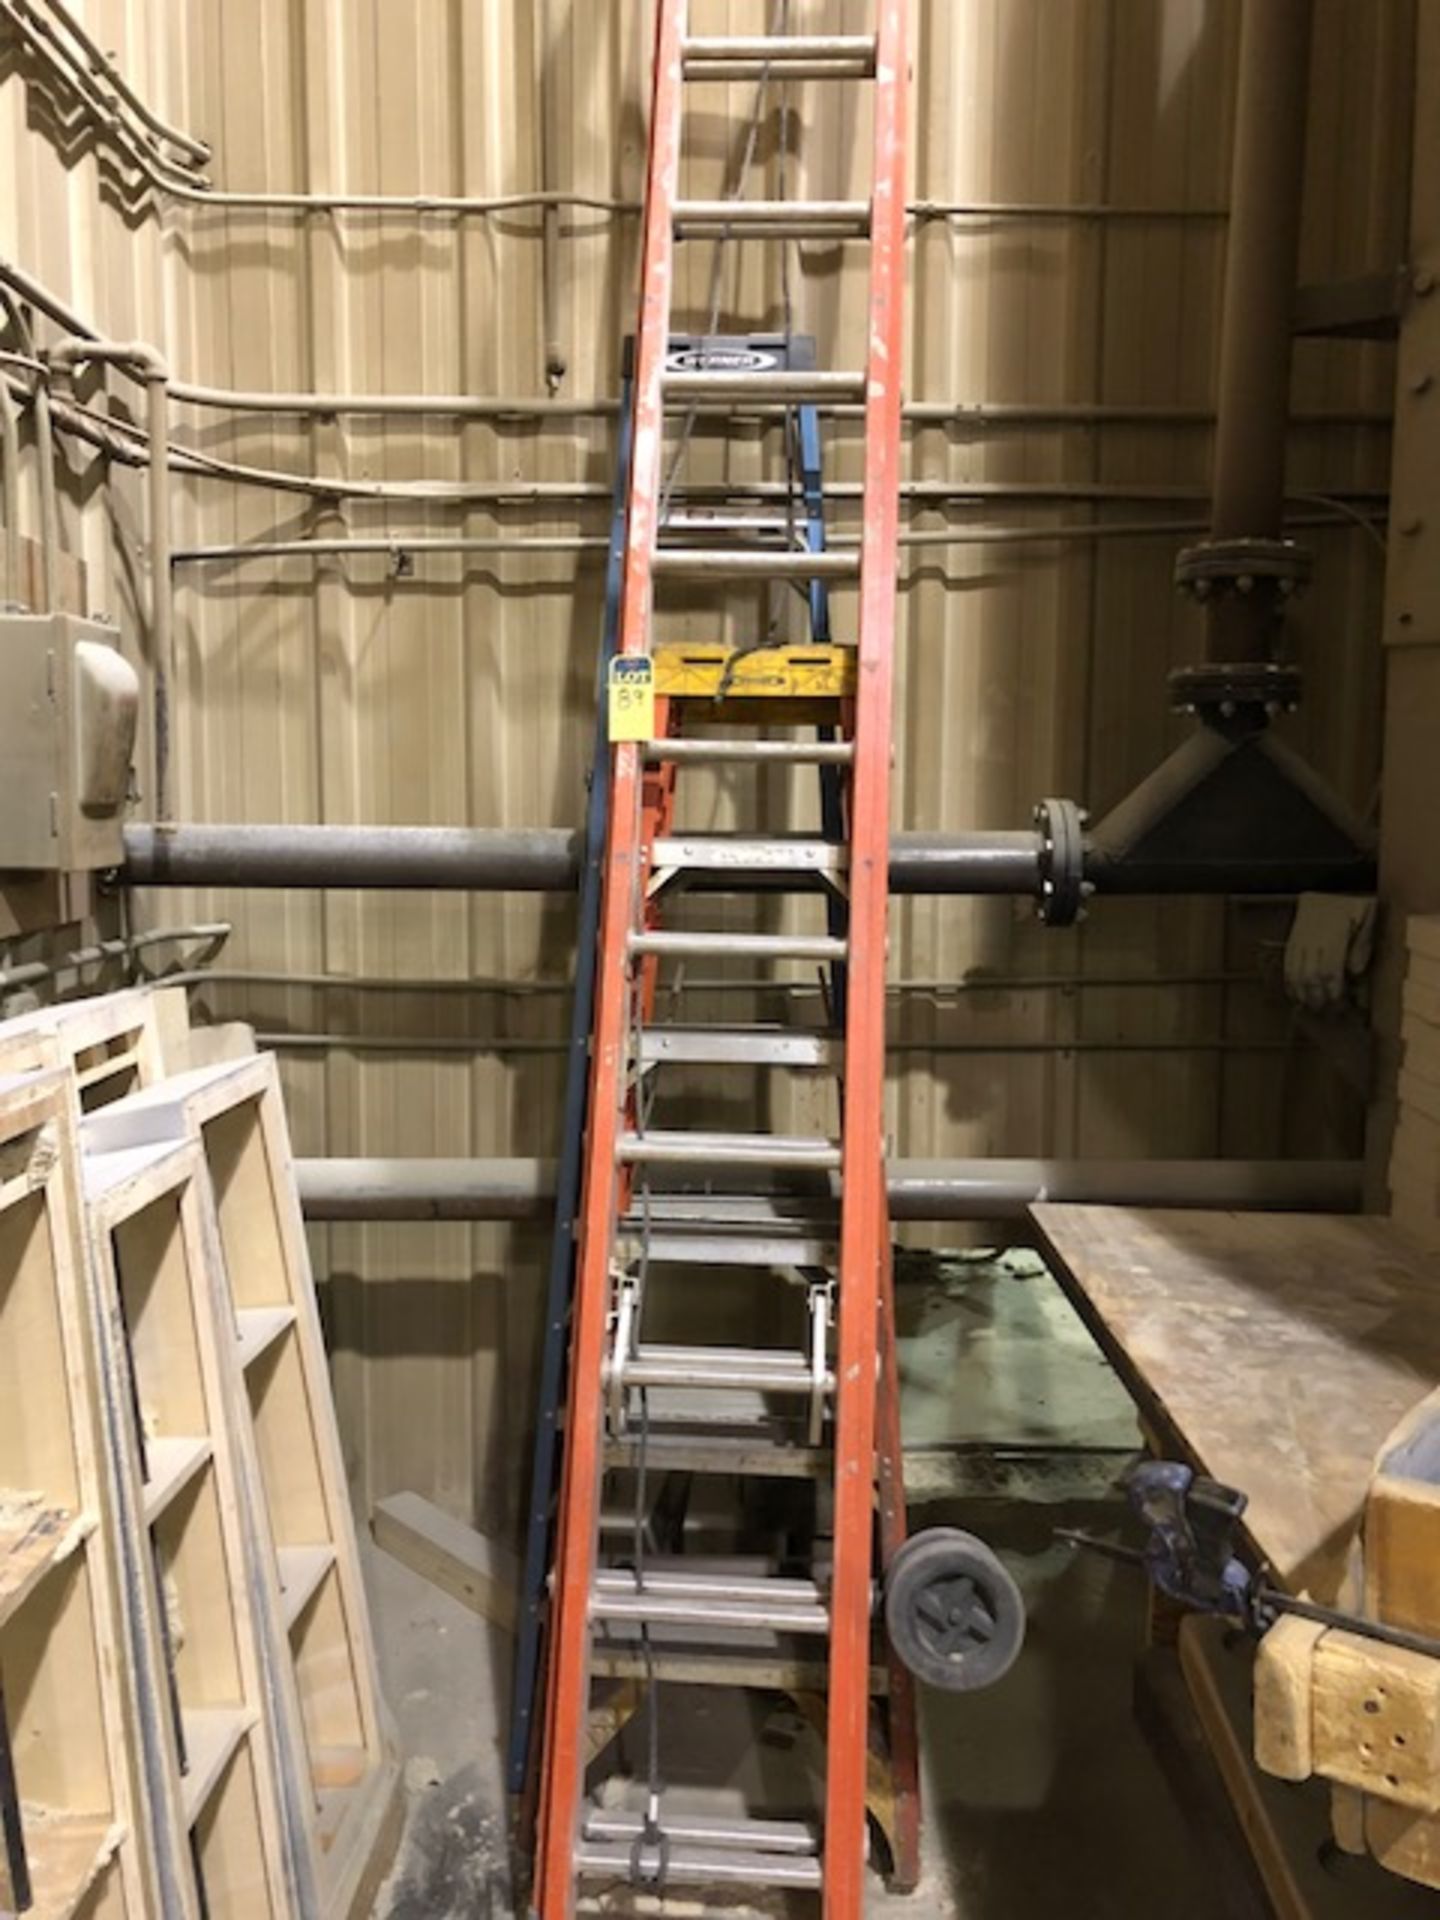 12’, 8’, 6’ ladders - removal available November 12, 2018